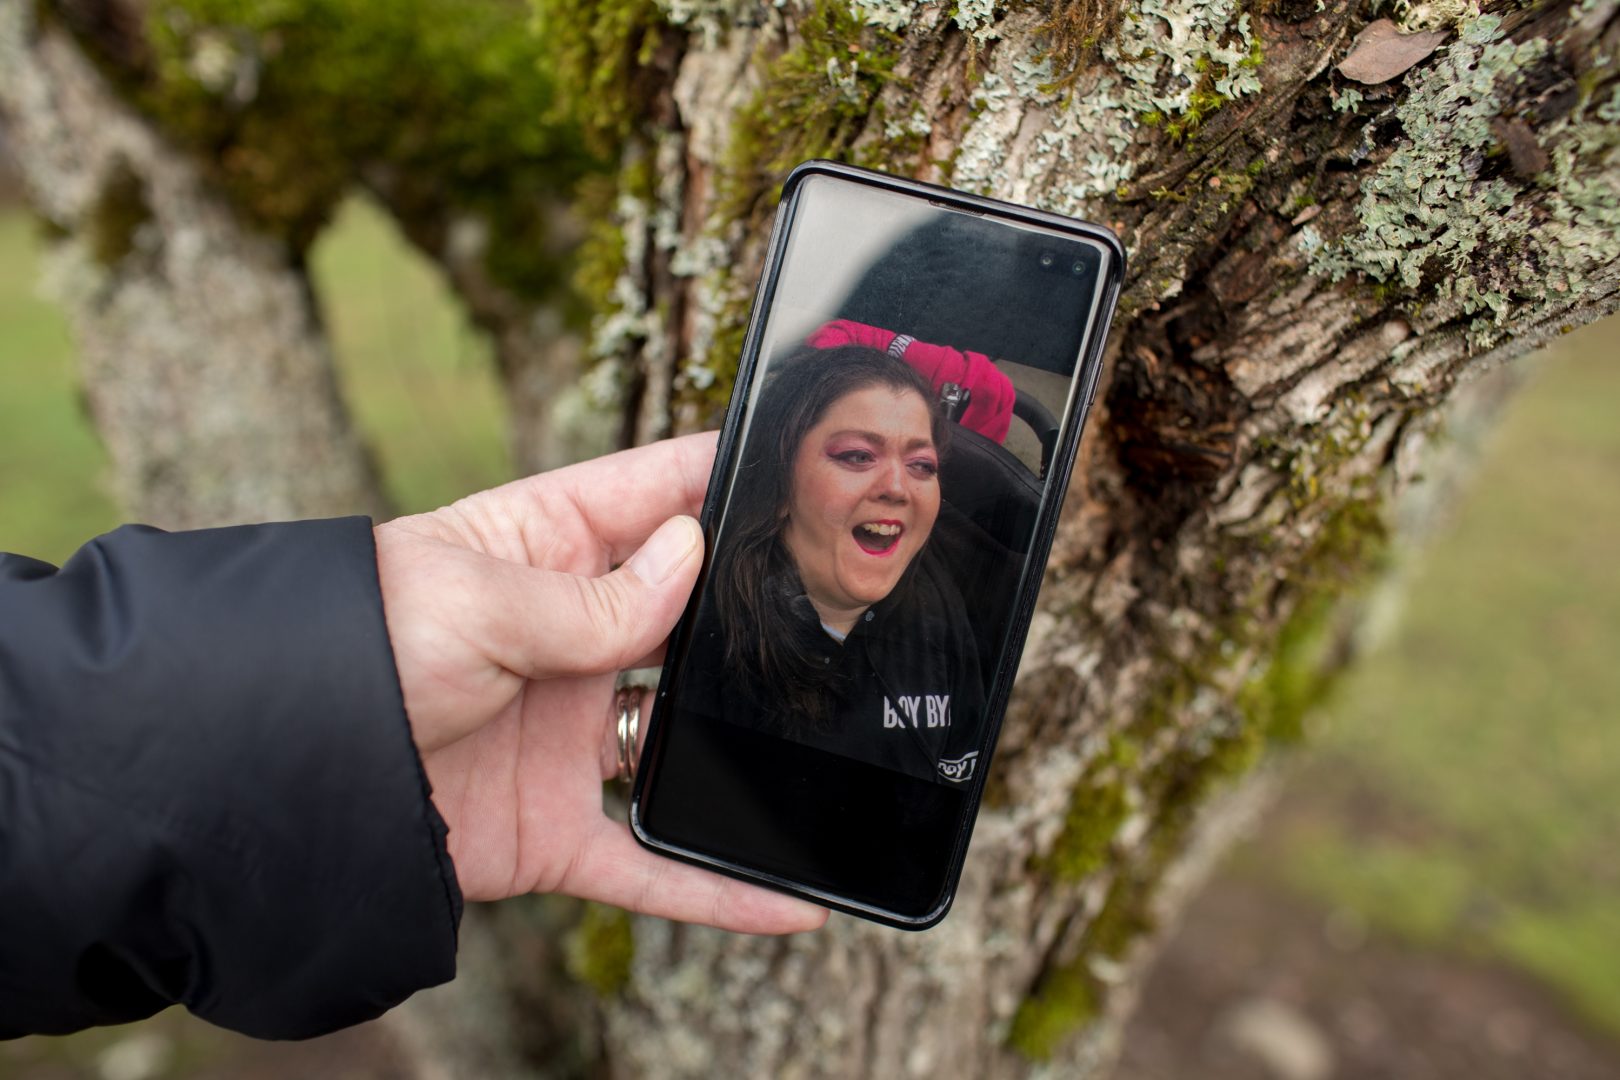 Kimberly Conger holds a phone photo of Sarah McSweeney in Oregon City, Oregon on Tuesday, November 24, 2020. McSweeney's bright pink makeup was a common look for her outgoing personality and love of color. 